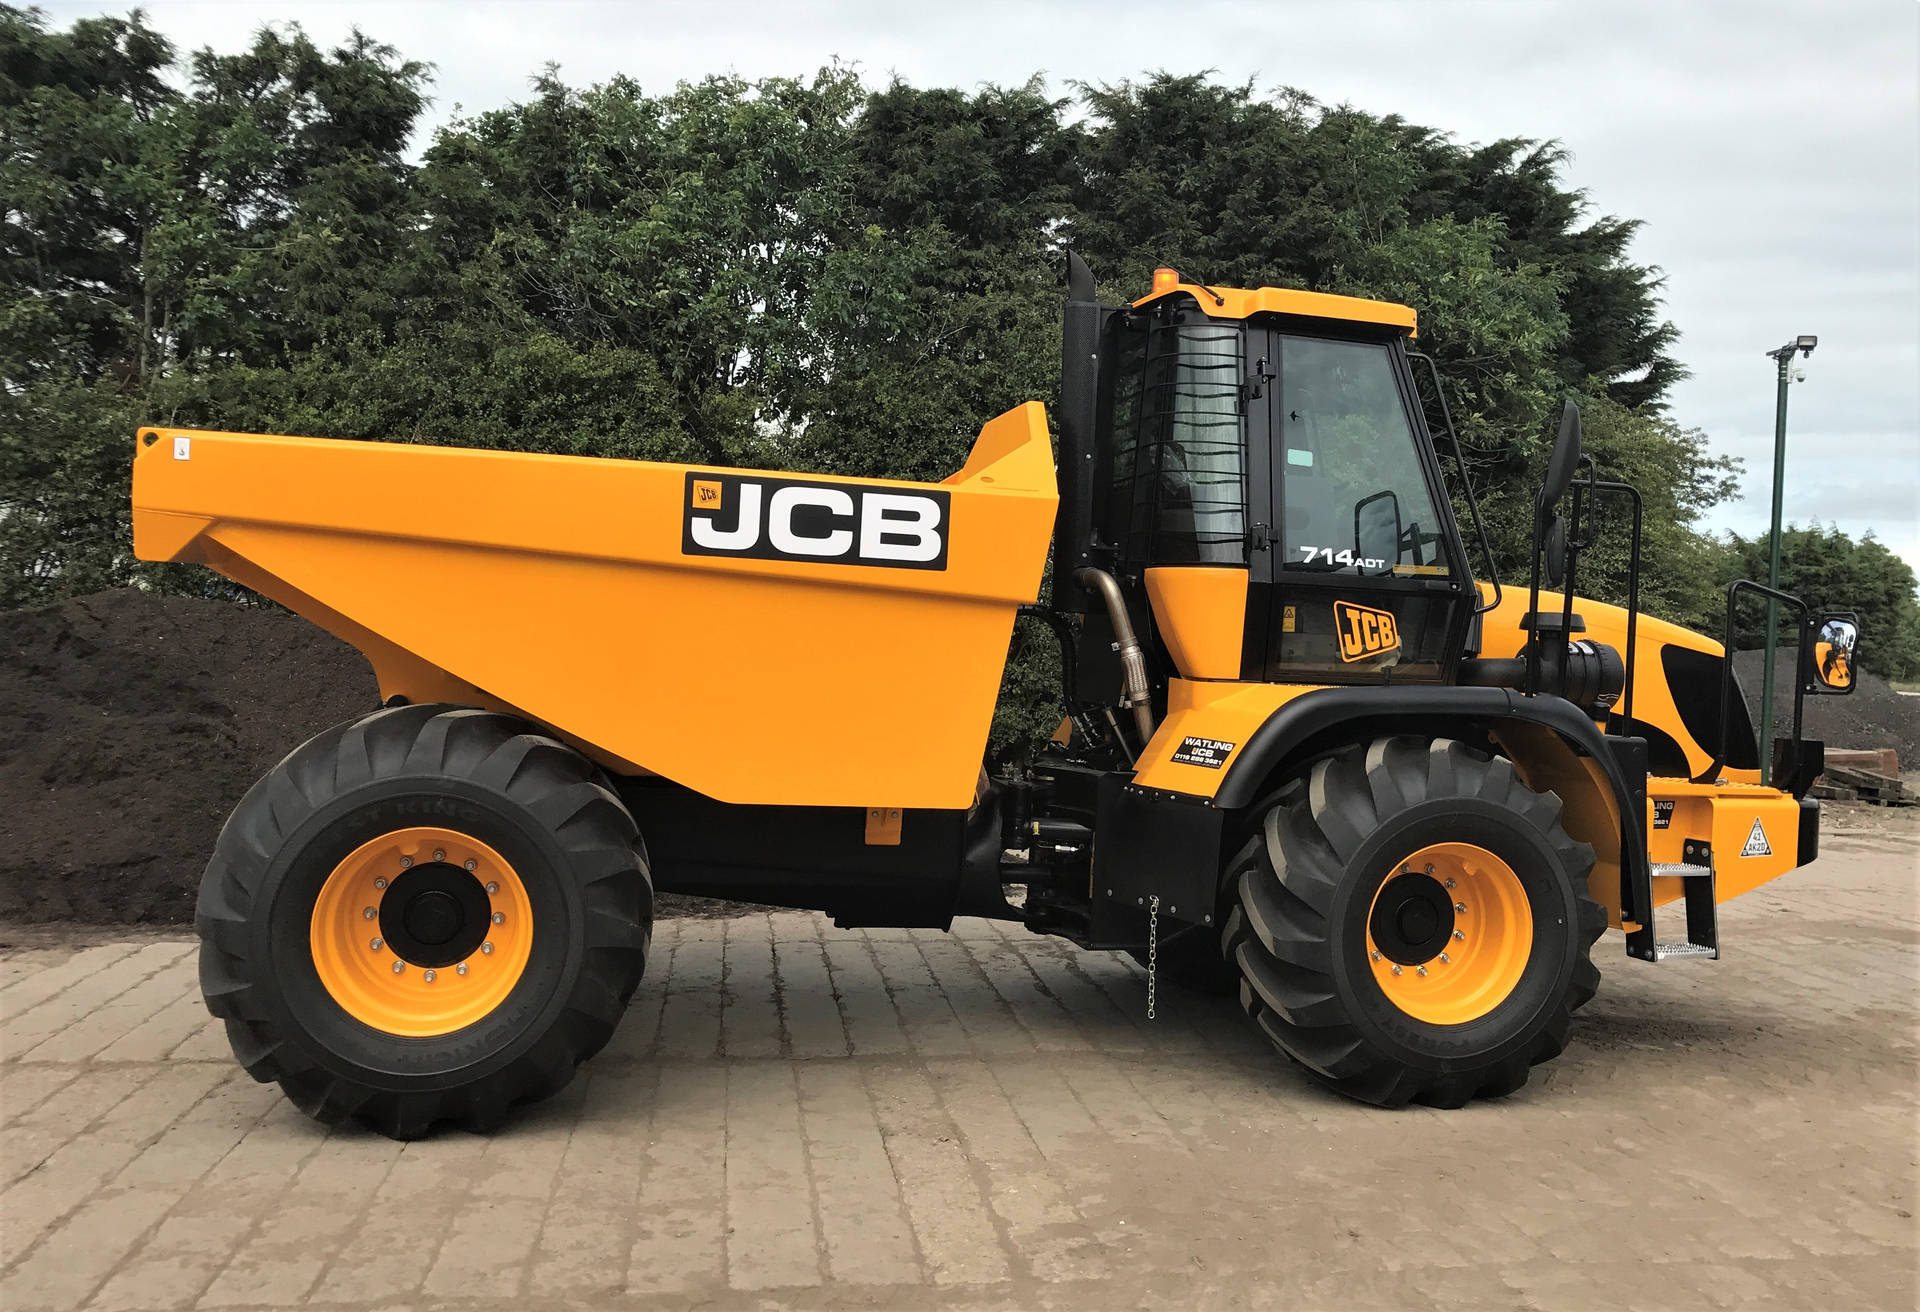 Jcb Cool Truck In Bright Yellow Color Background